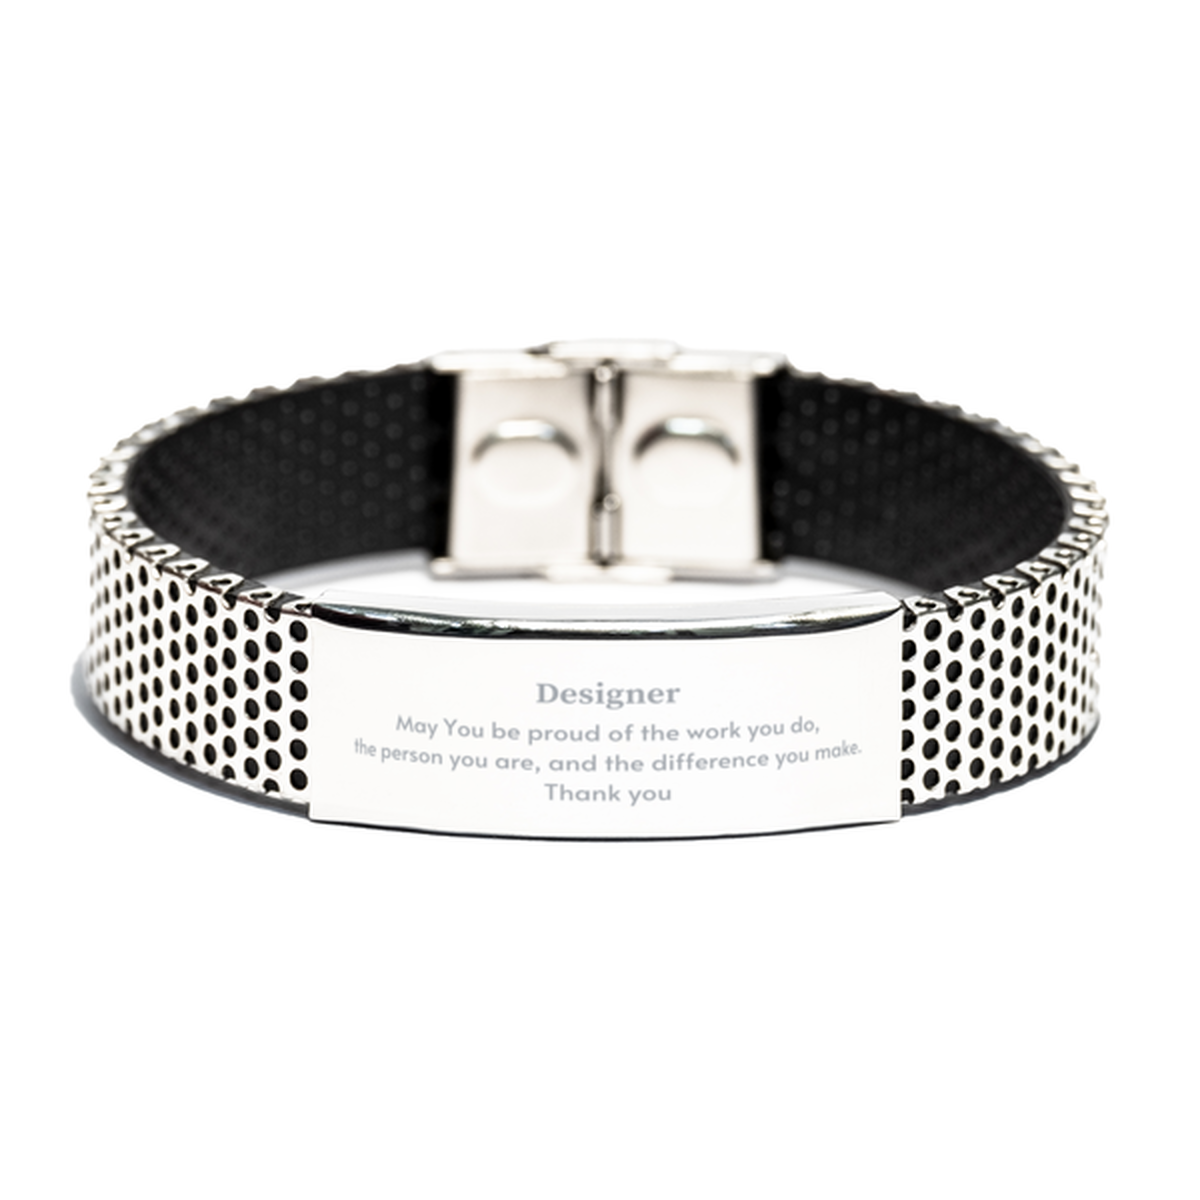 Heartwarming Stainless Steel Bracelet Retirement Coworkers Gifts for Designer, Designer May You be proud of the work you do, the person you are Gifts for Boss Men Women Friends